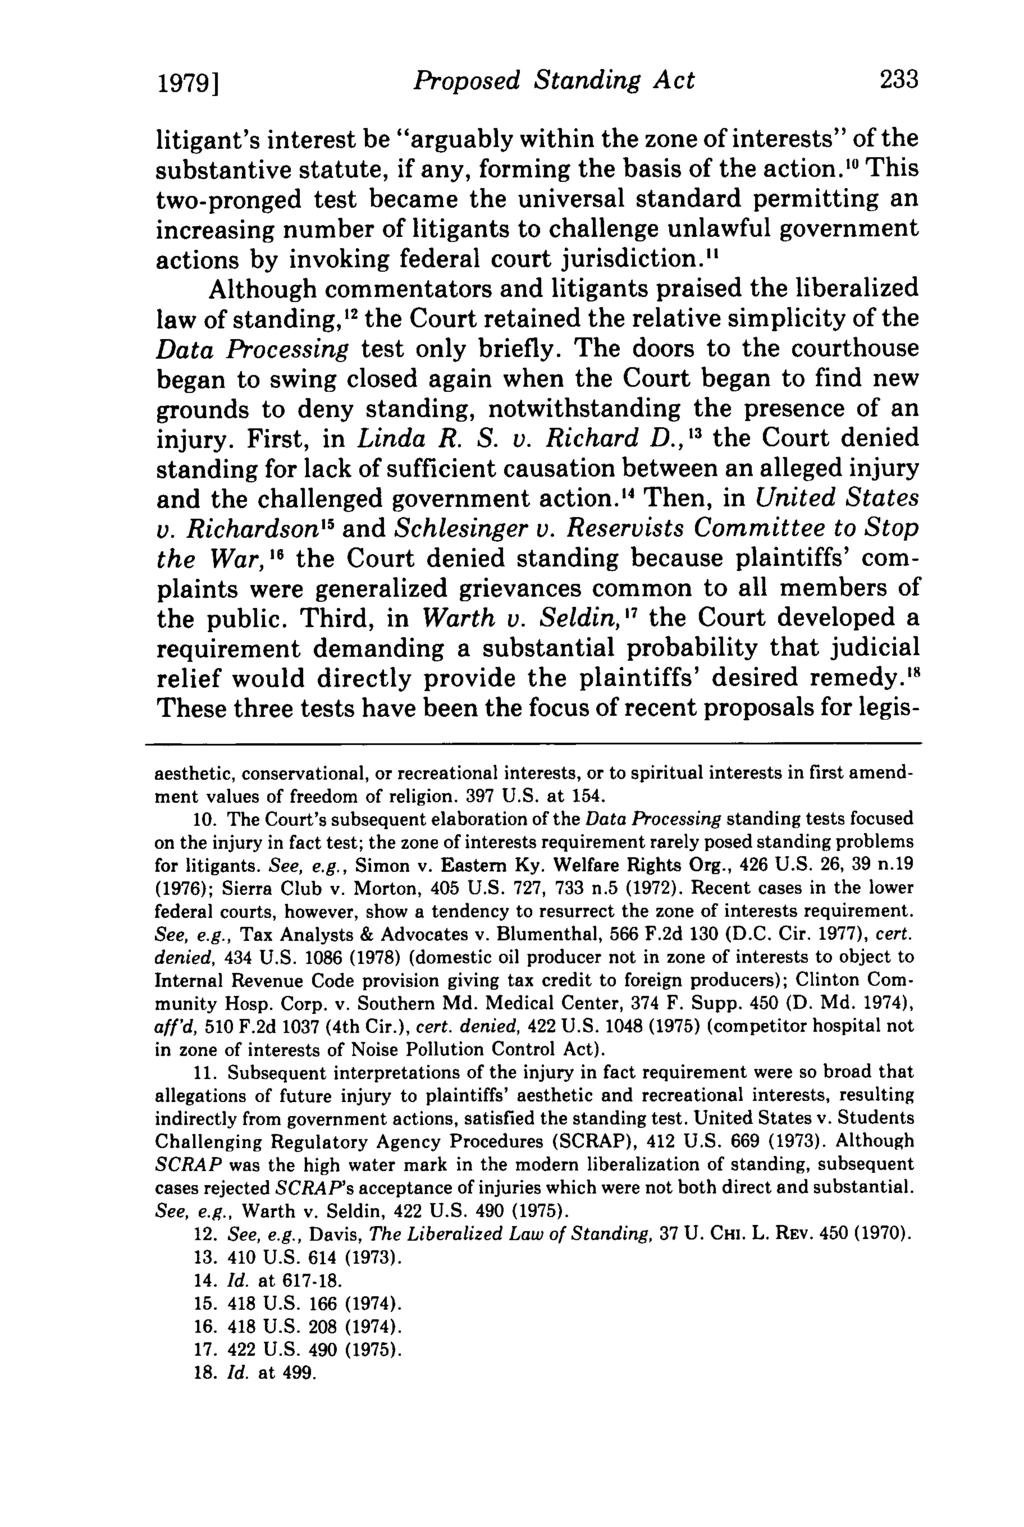 1979] Proposed Standing Act litigant's interest be "arguably within the zone of interests" of the substantive statute, if any, forming the basis of the action.